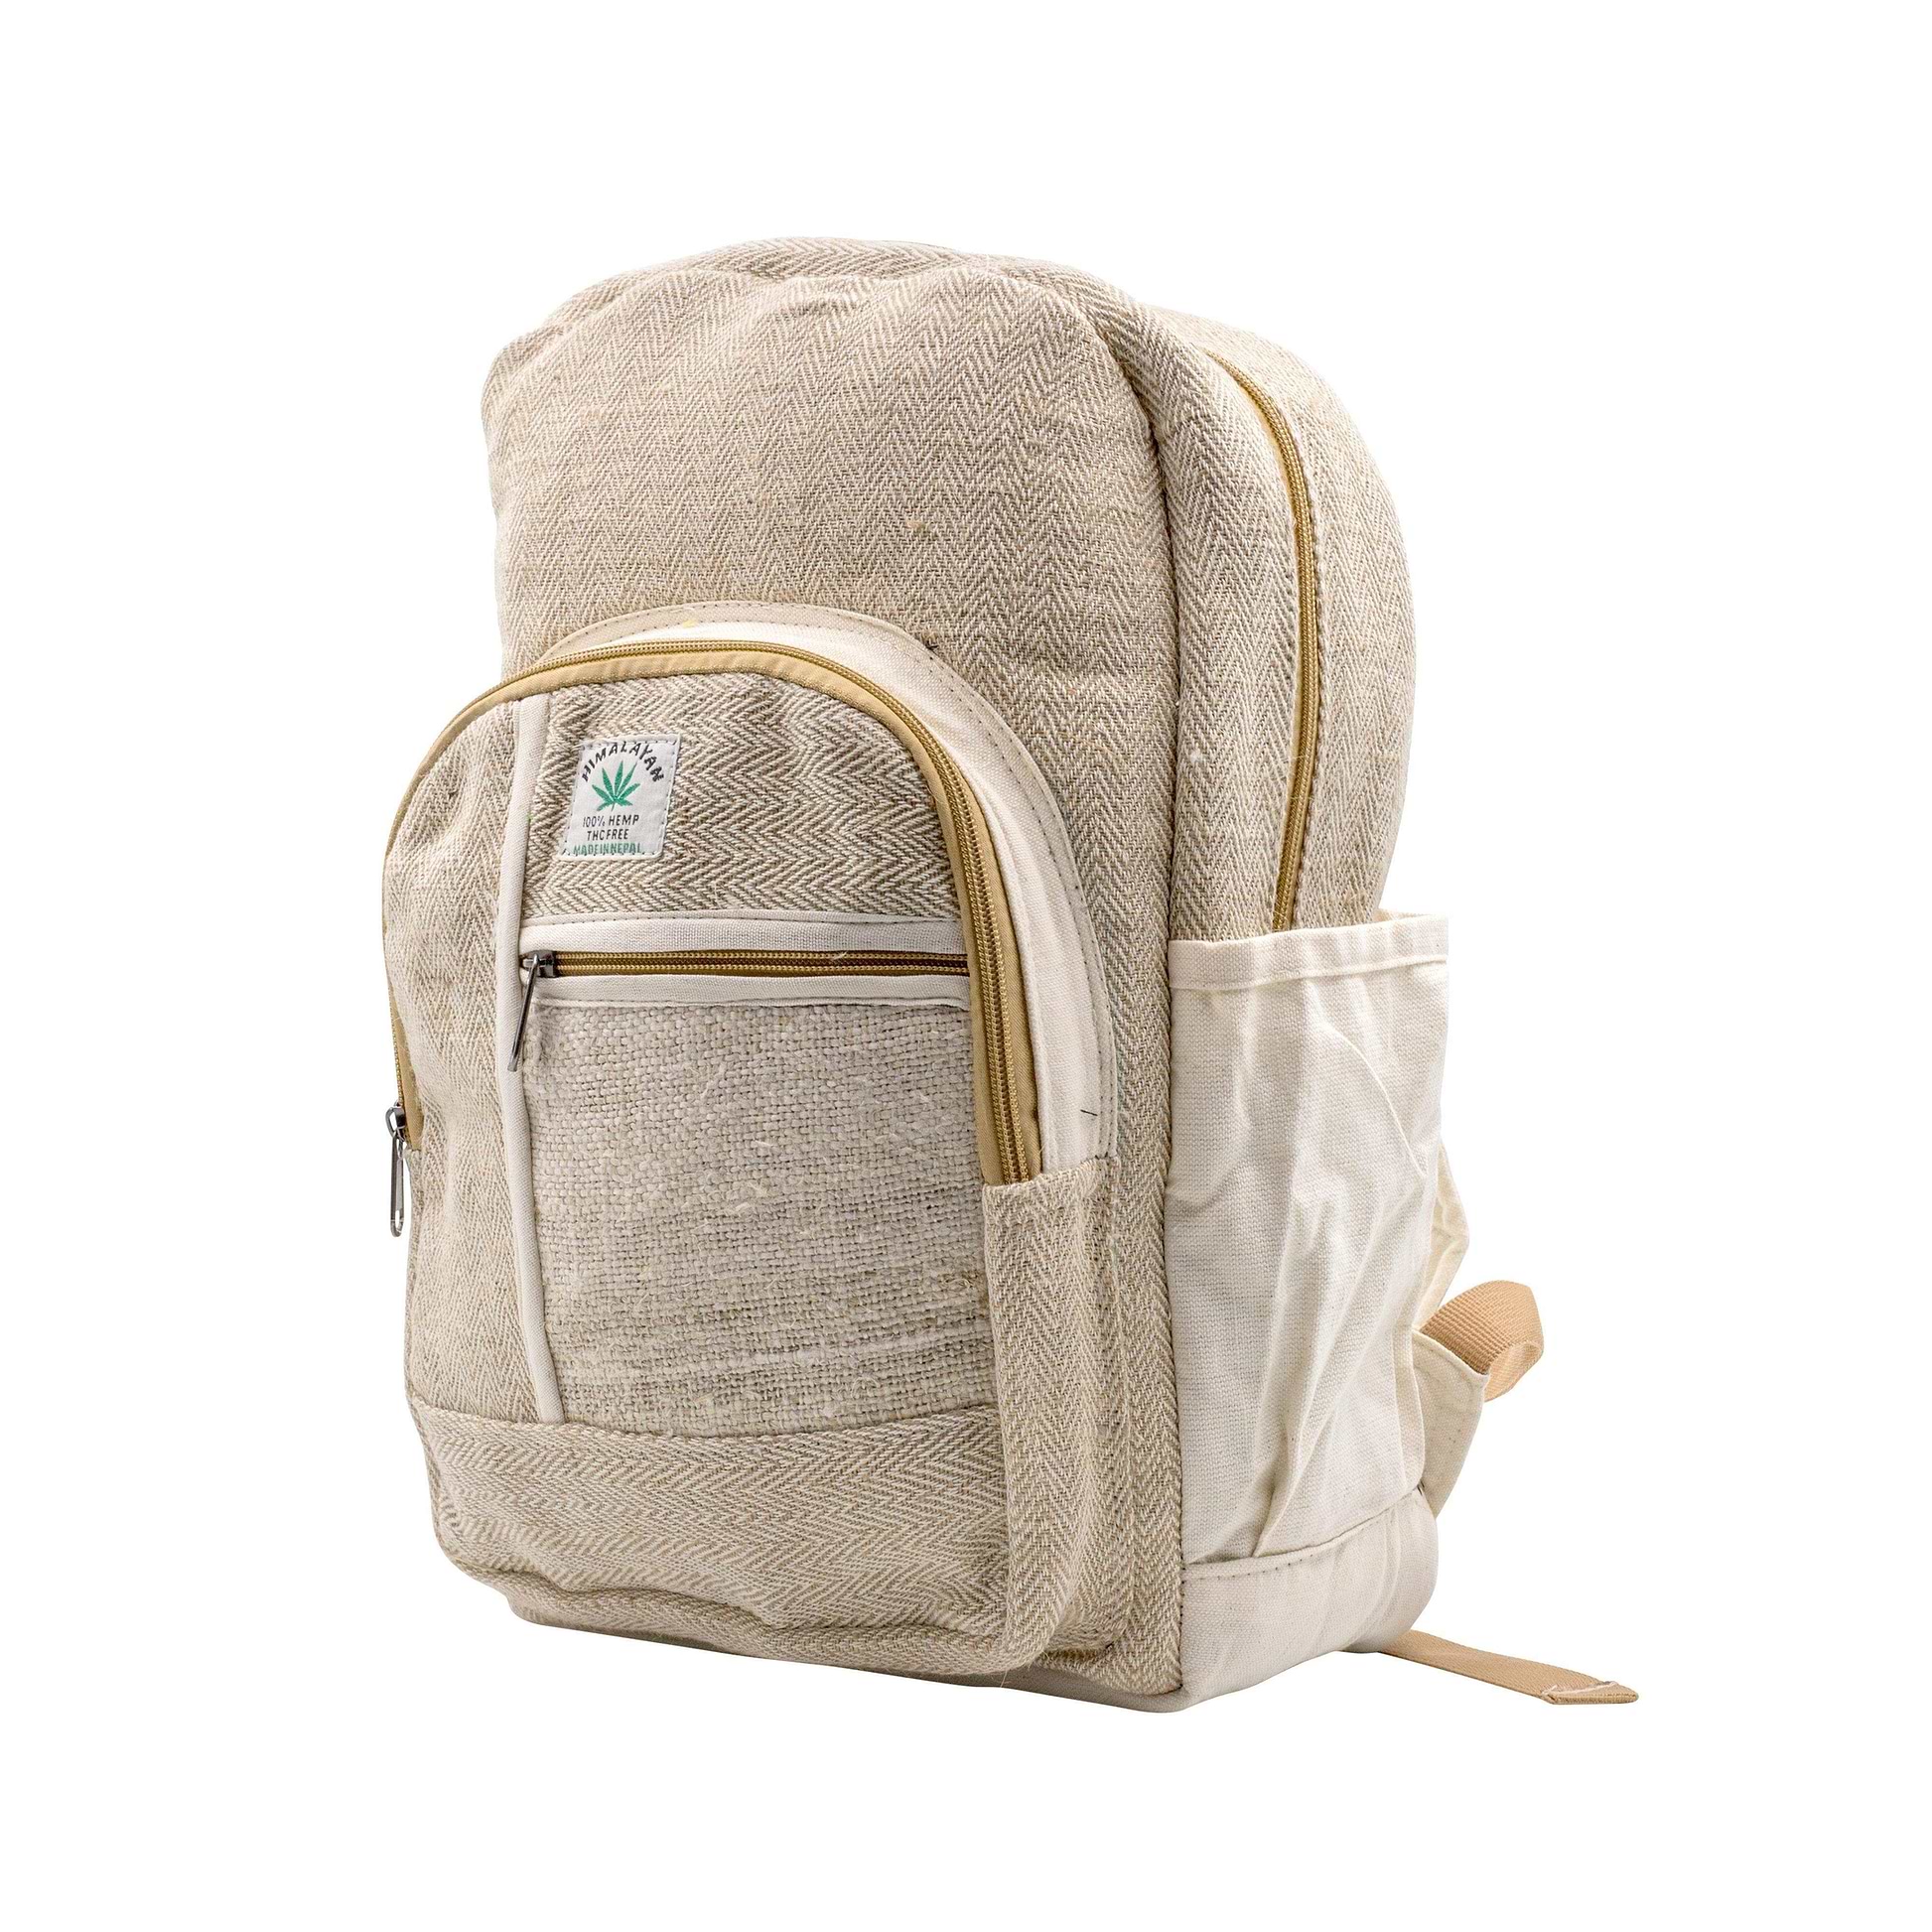 Functional hemp-inspired backpack fashion apparel spacious ethnic color and prins with weed leaf Hemp logo